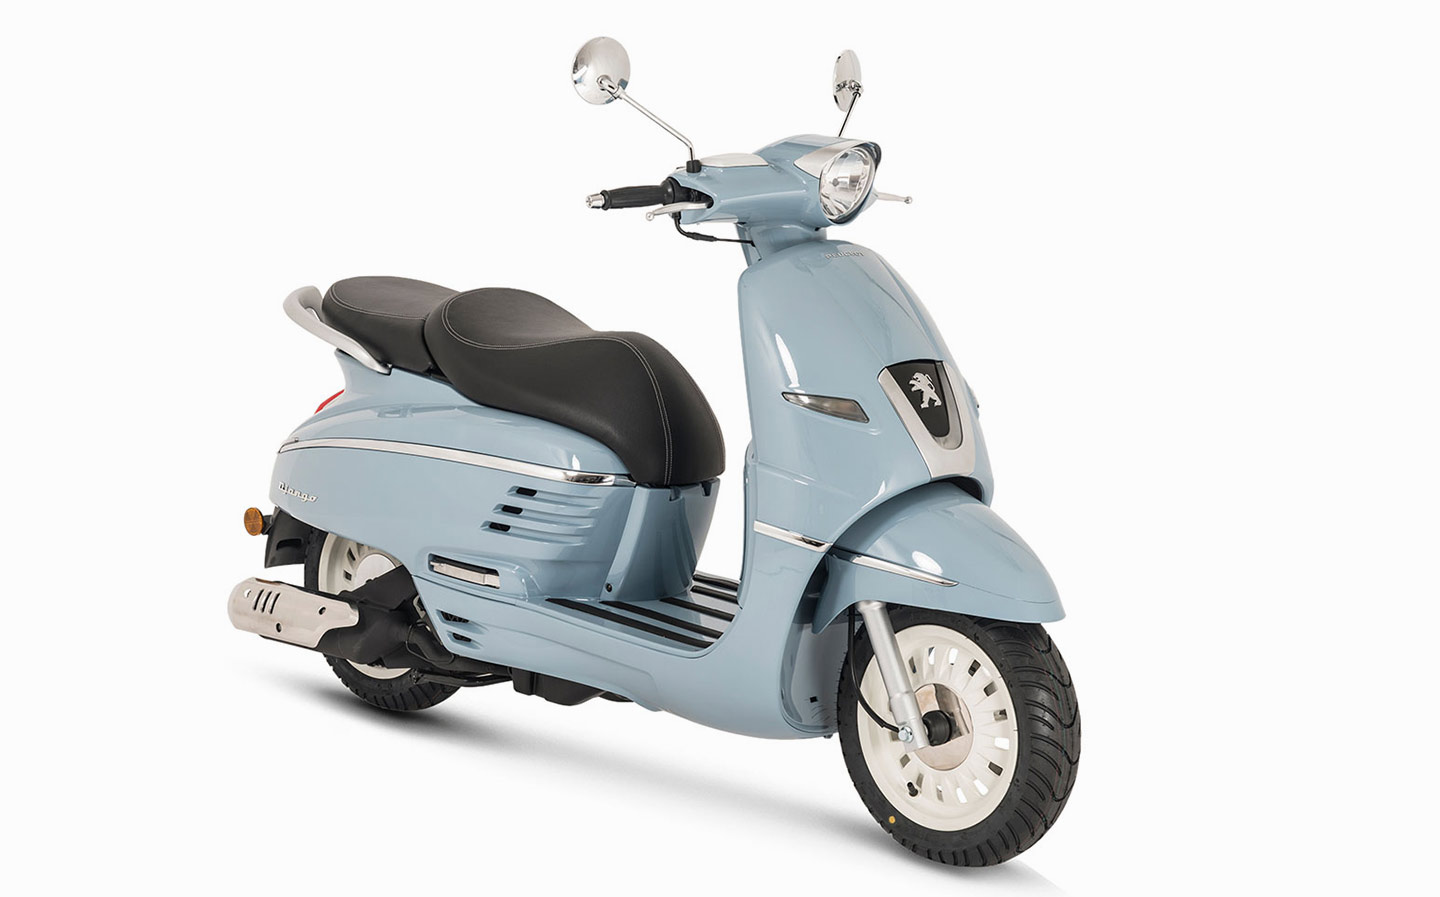 https://www.driving.co.uk/wp-content/uploads/sites/5/2018/06/moped-or-scooter.jpg